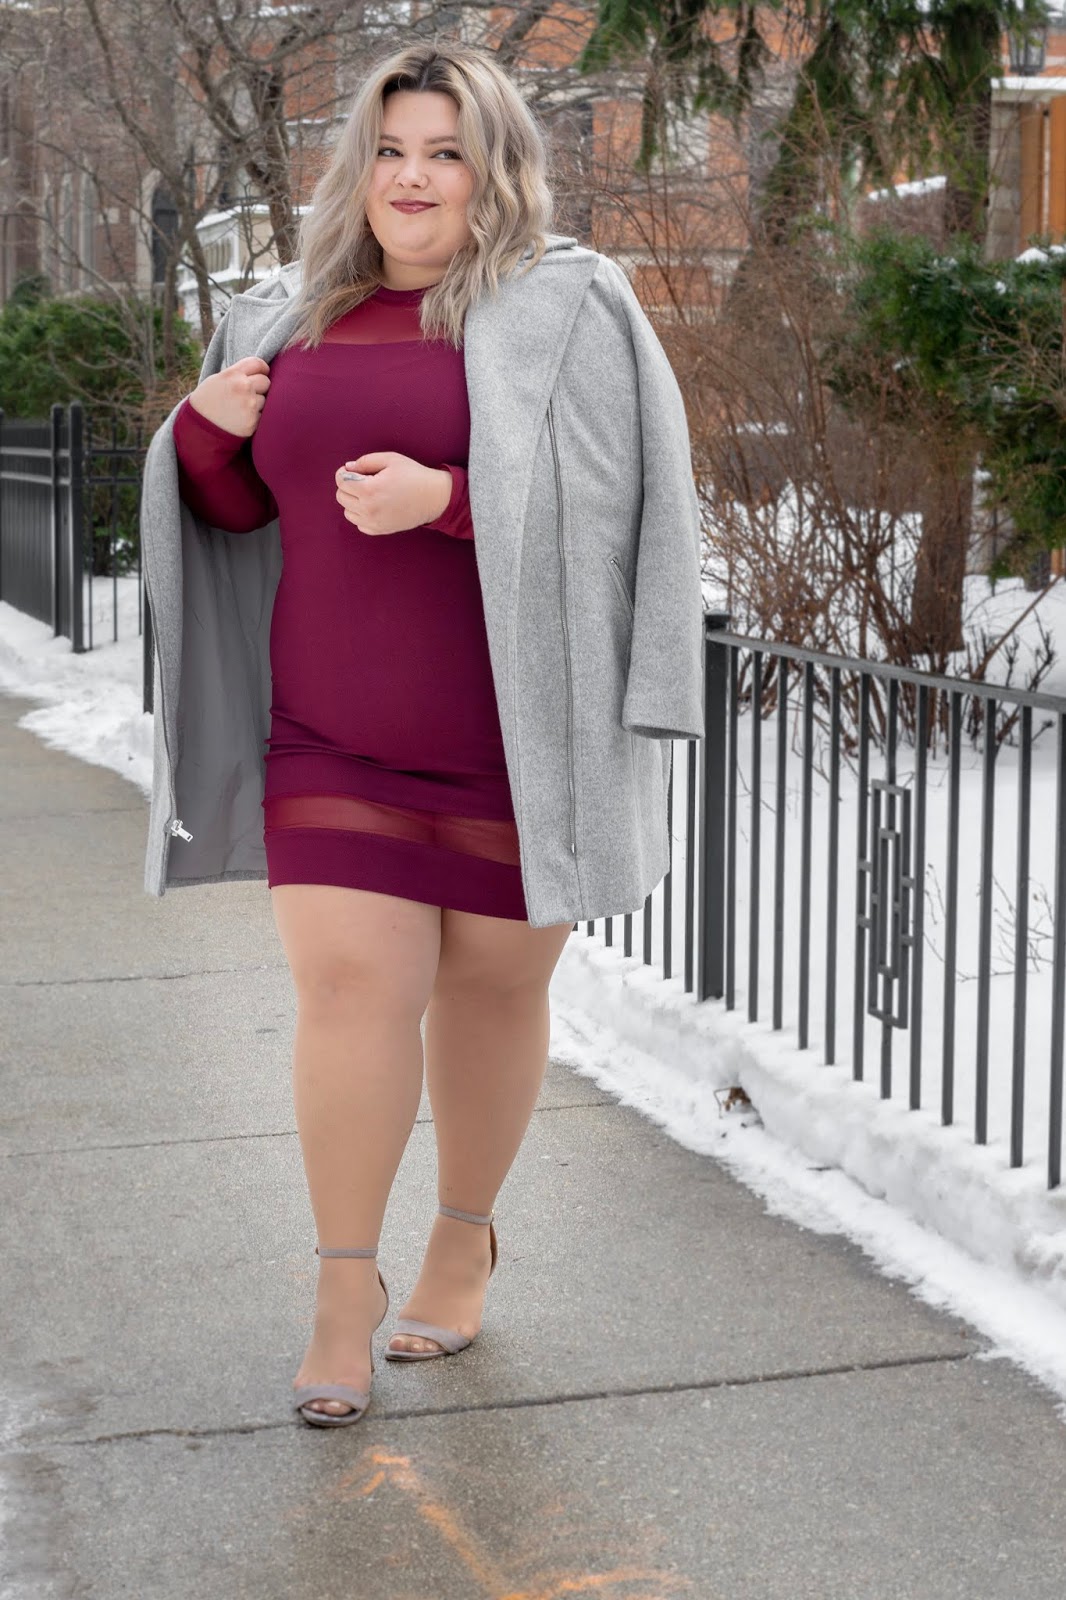 Chicago Plus Size Petite Fashion Blogger, YouTuber, and model Natalie Craig, of Natalie in the City, reviews Fashion Nova Curve's Pretty Young Thang Dress.